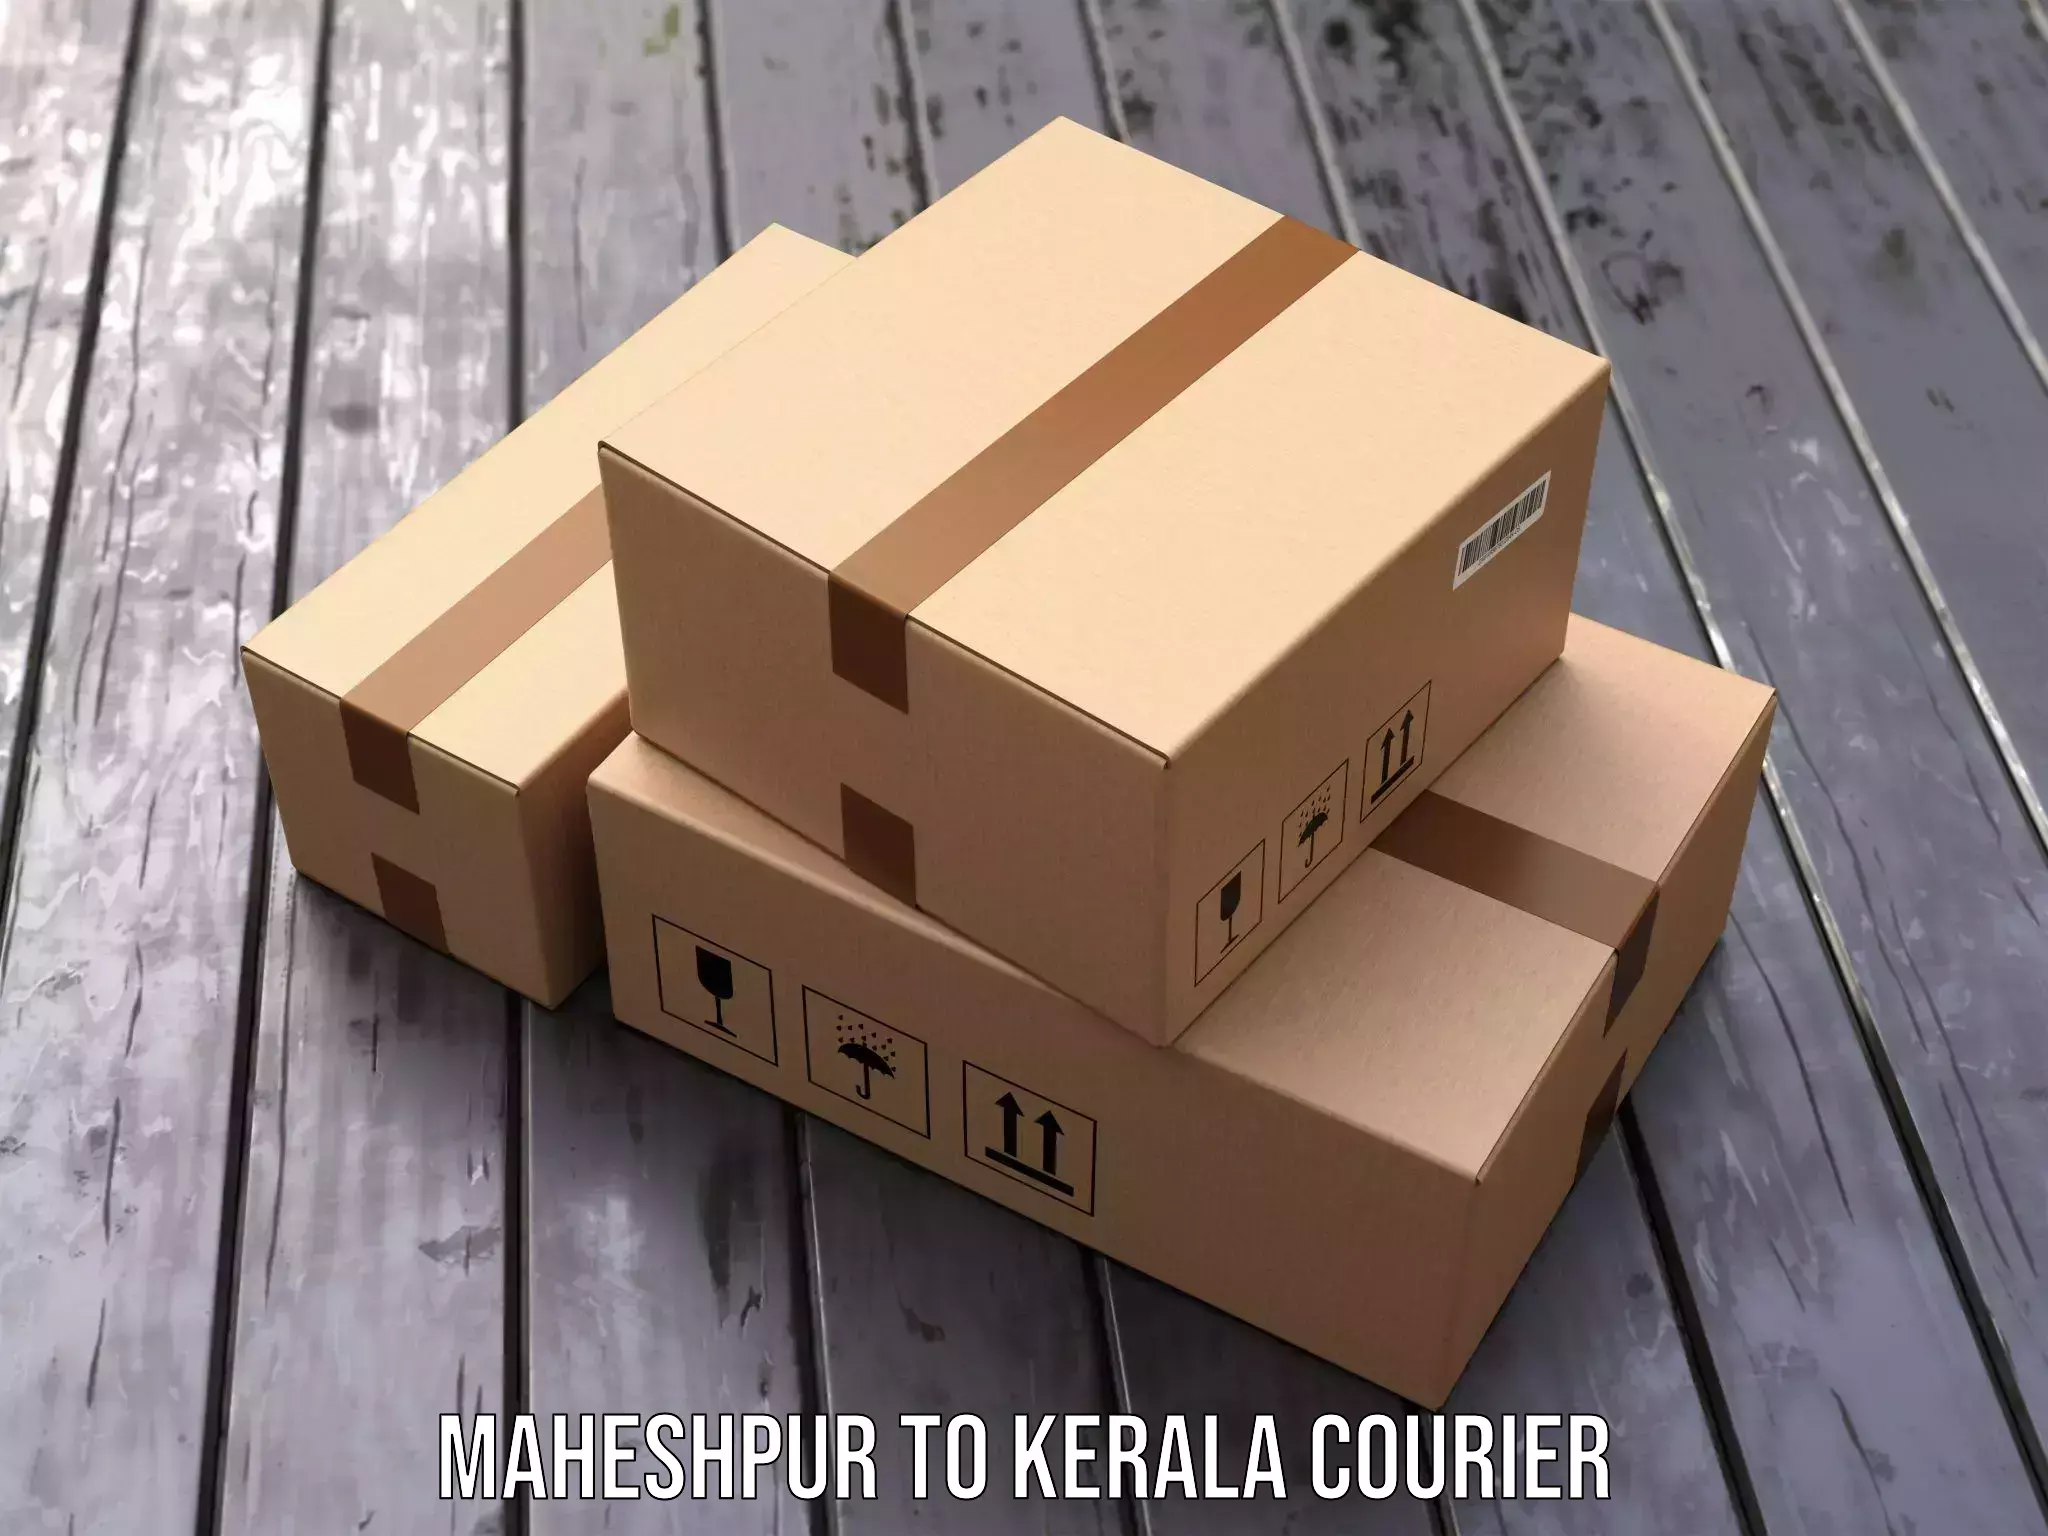 Nationwide delivery network Maheshpur to Alappuzha